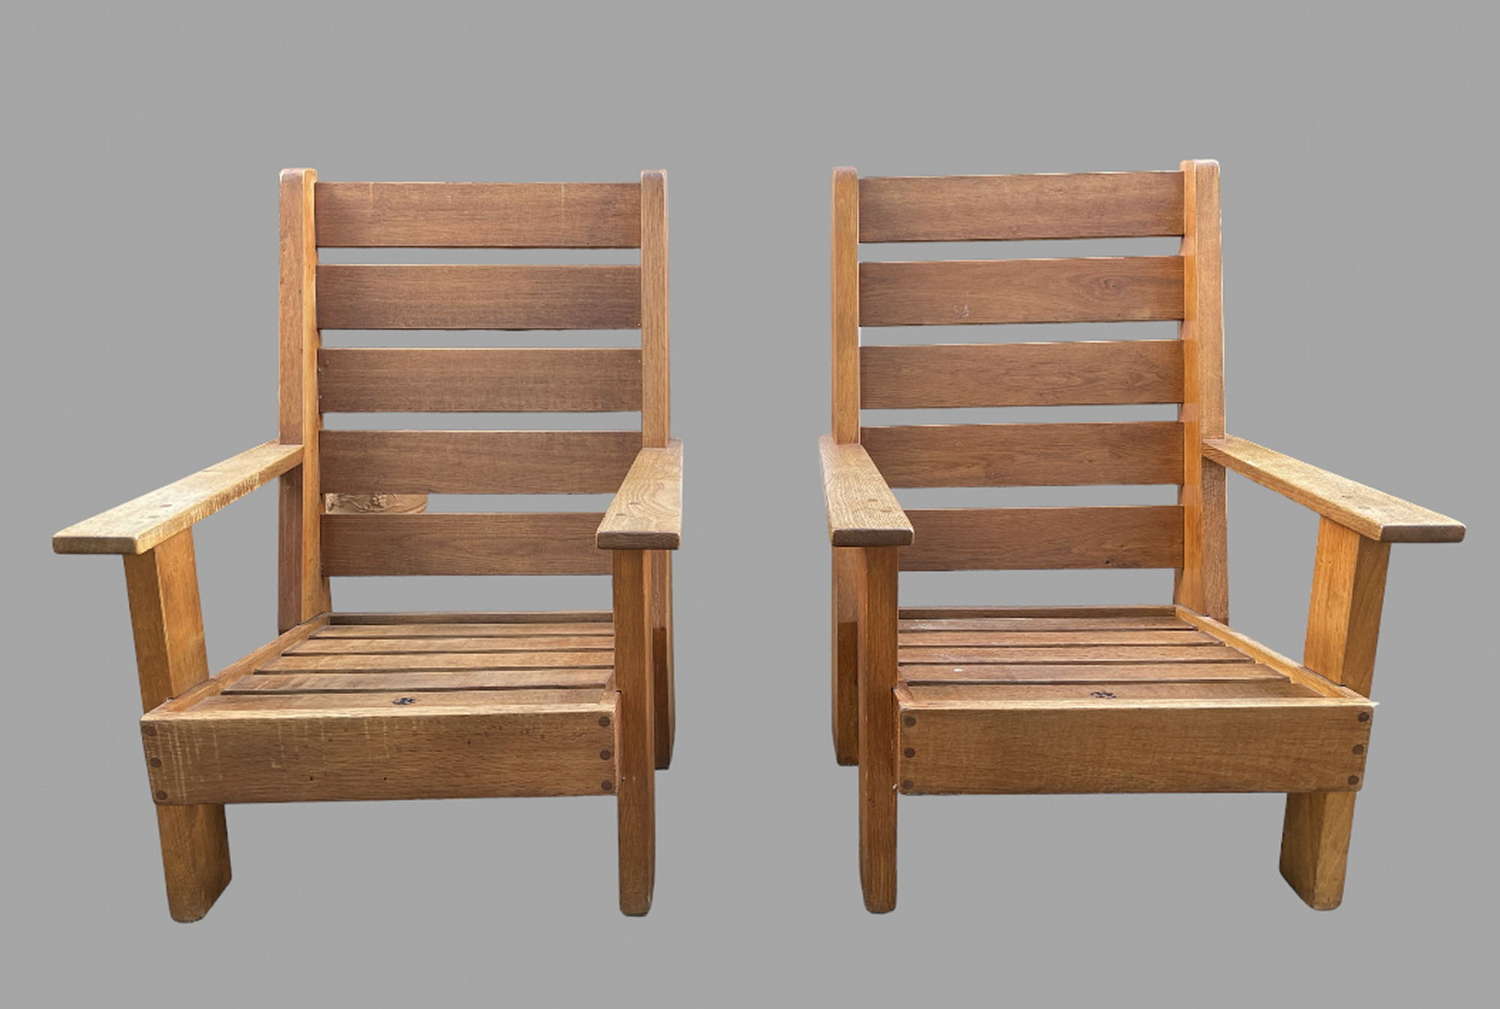 A Fabulous Pair Of French Oak Chairs c1950